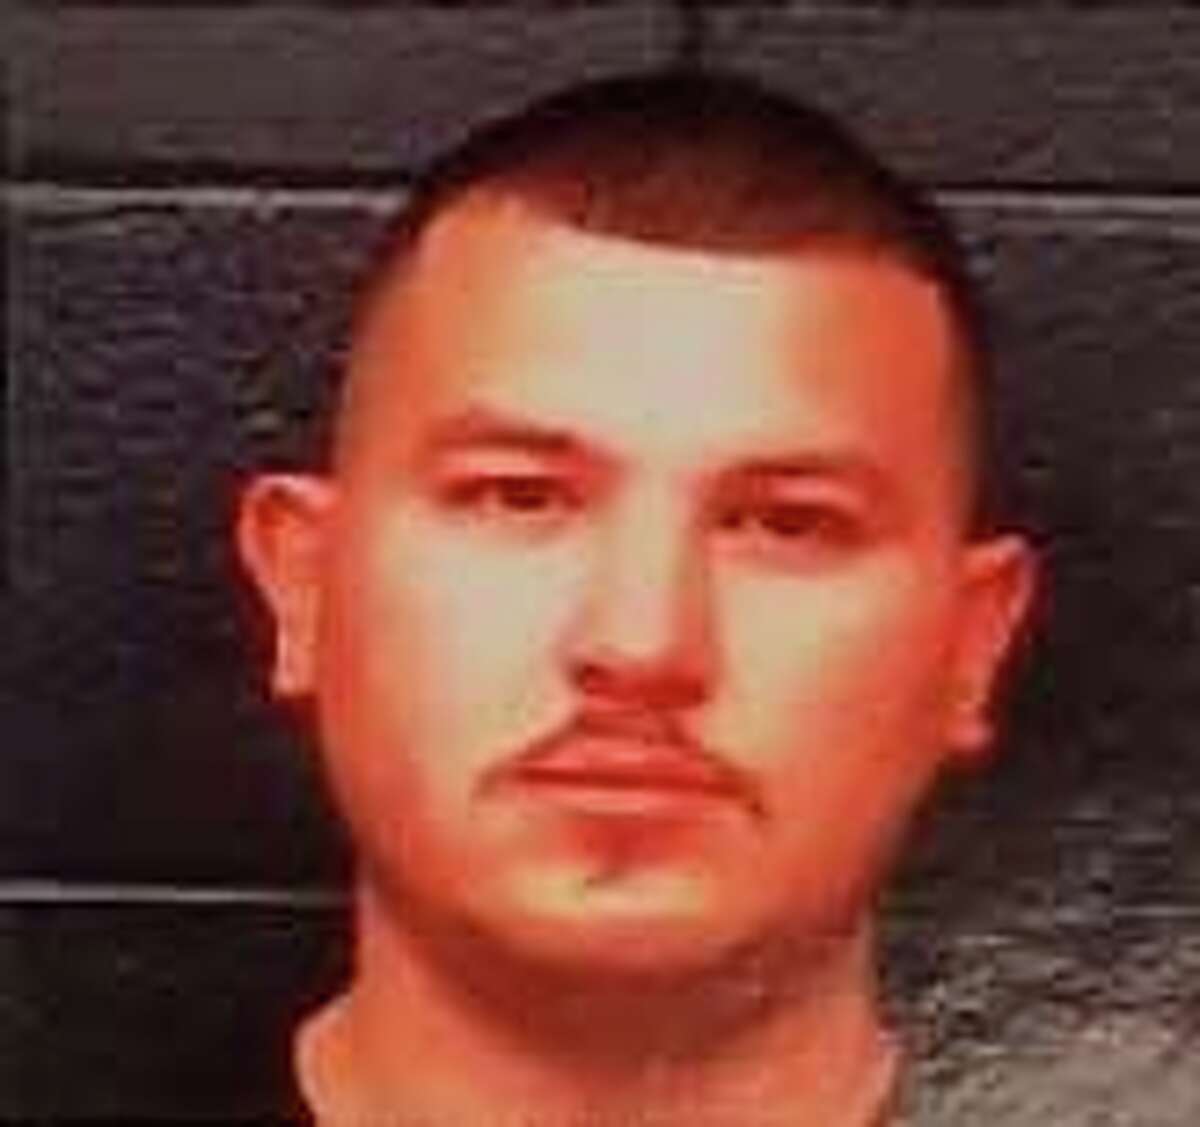 Carlos "Guero" Castaneda was charged with conspiracy to commit auto theft and engaging in organized criminal activity.